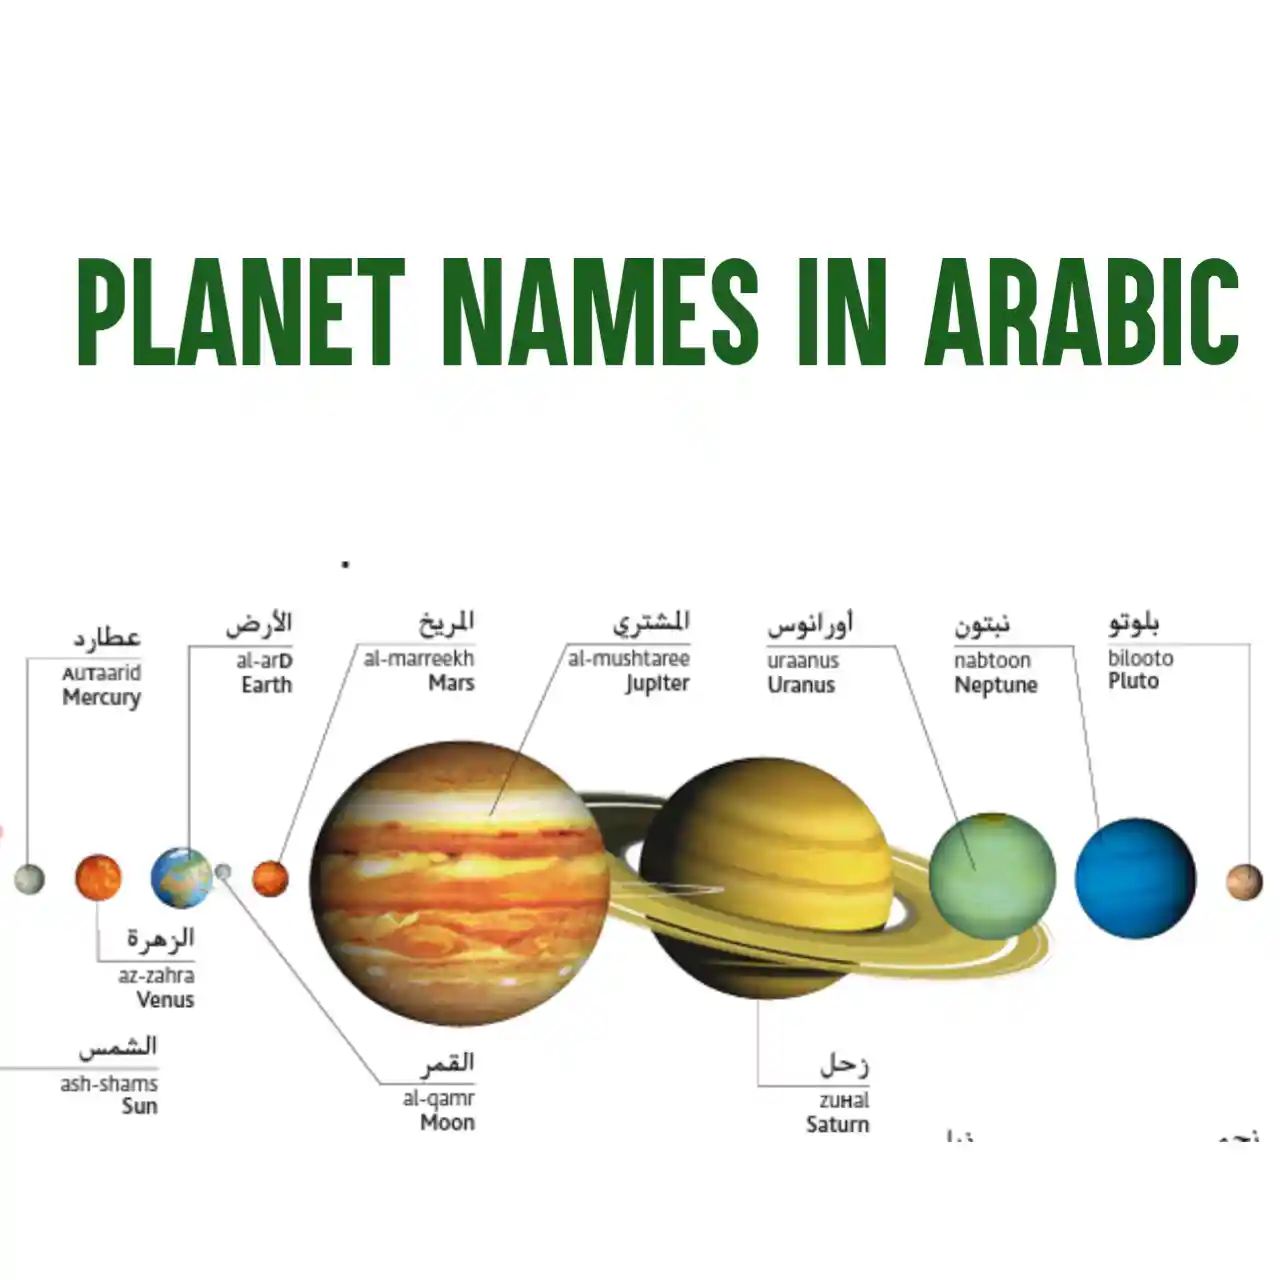 Planets in Arabic